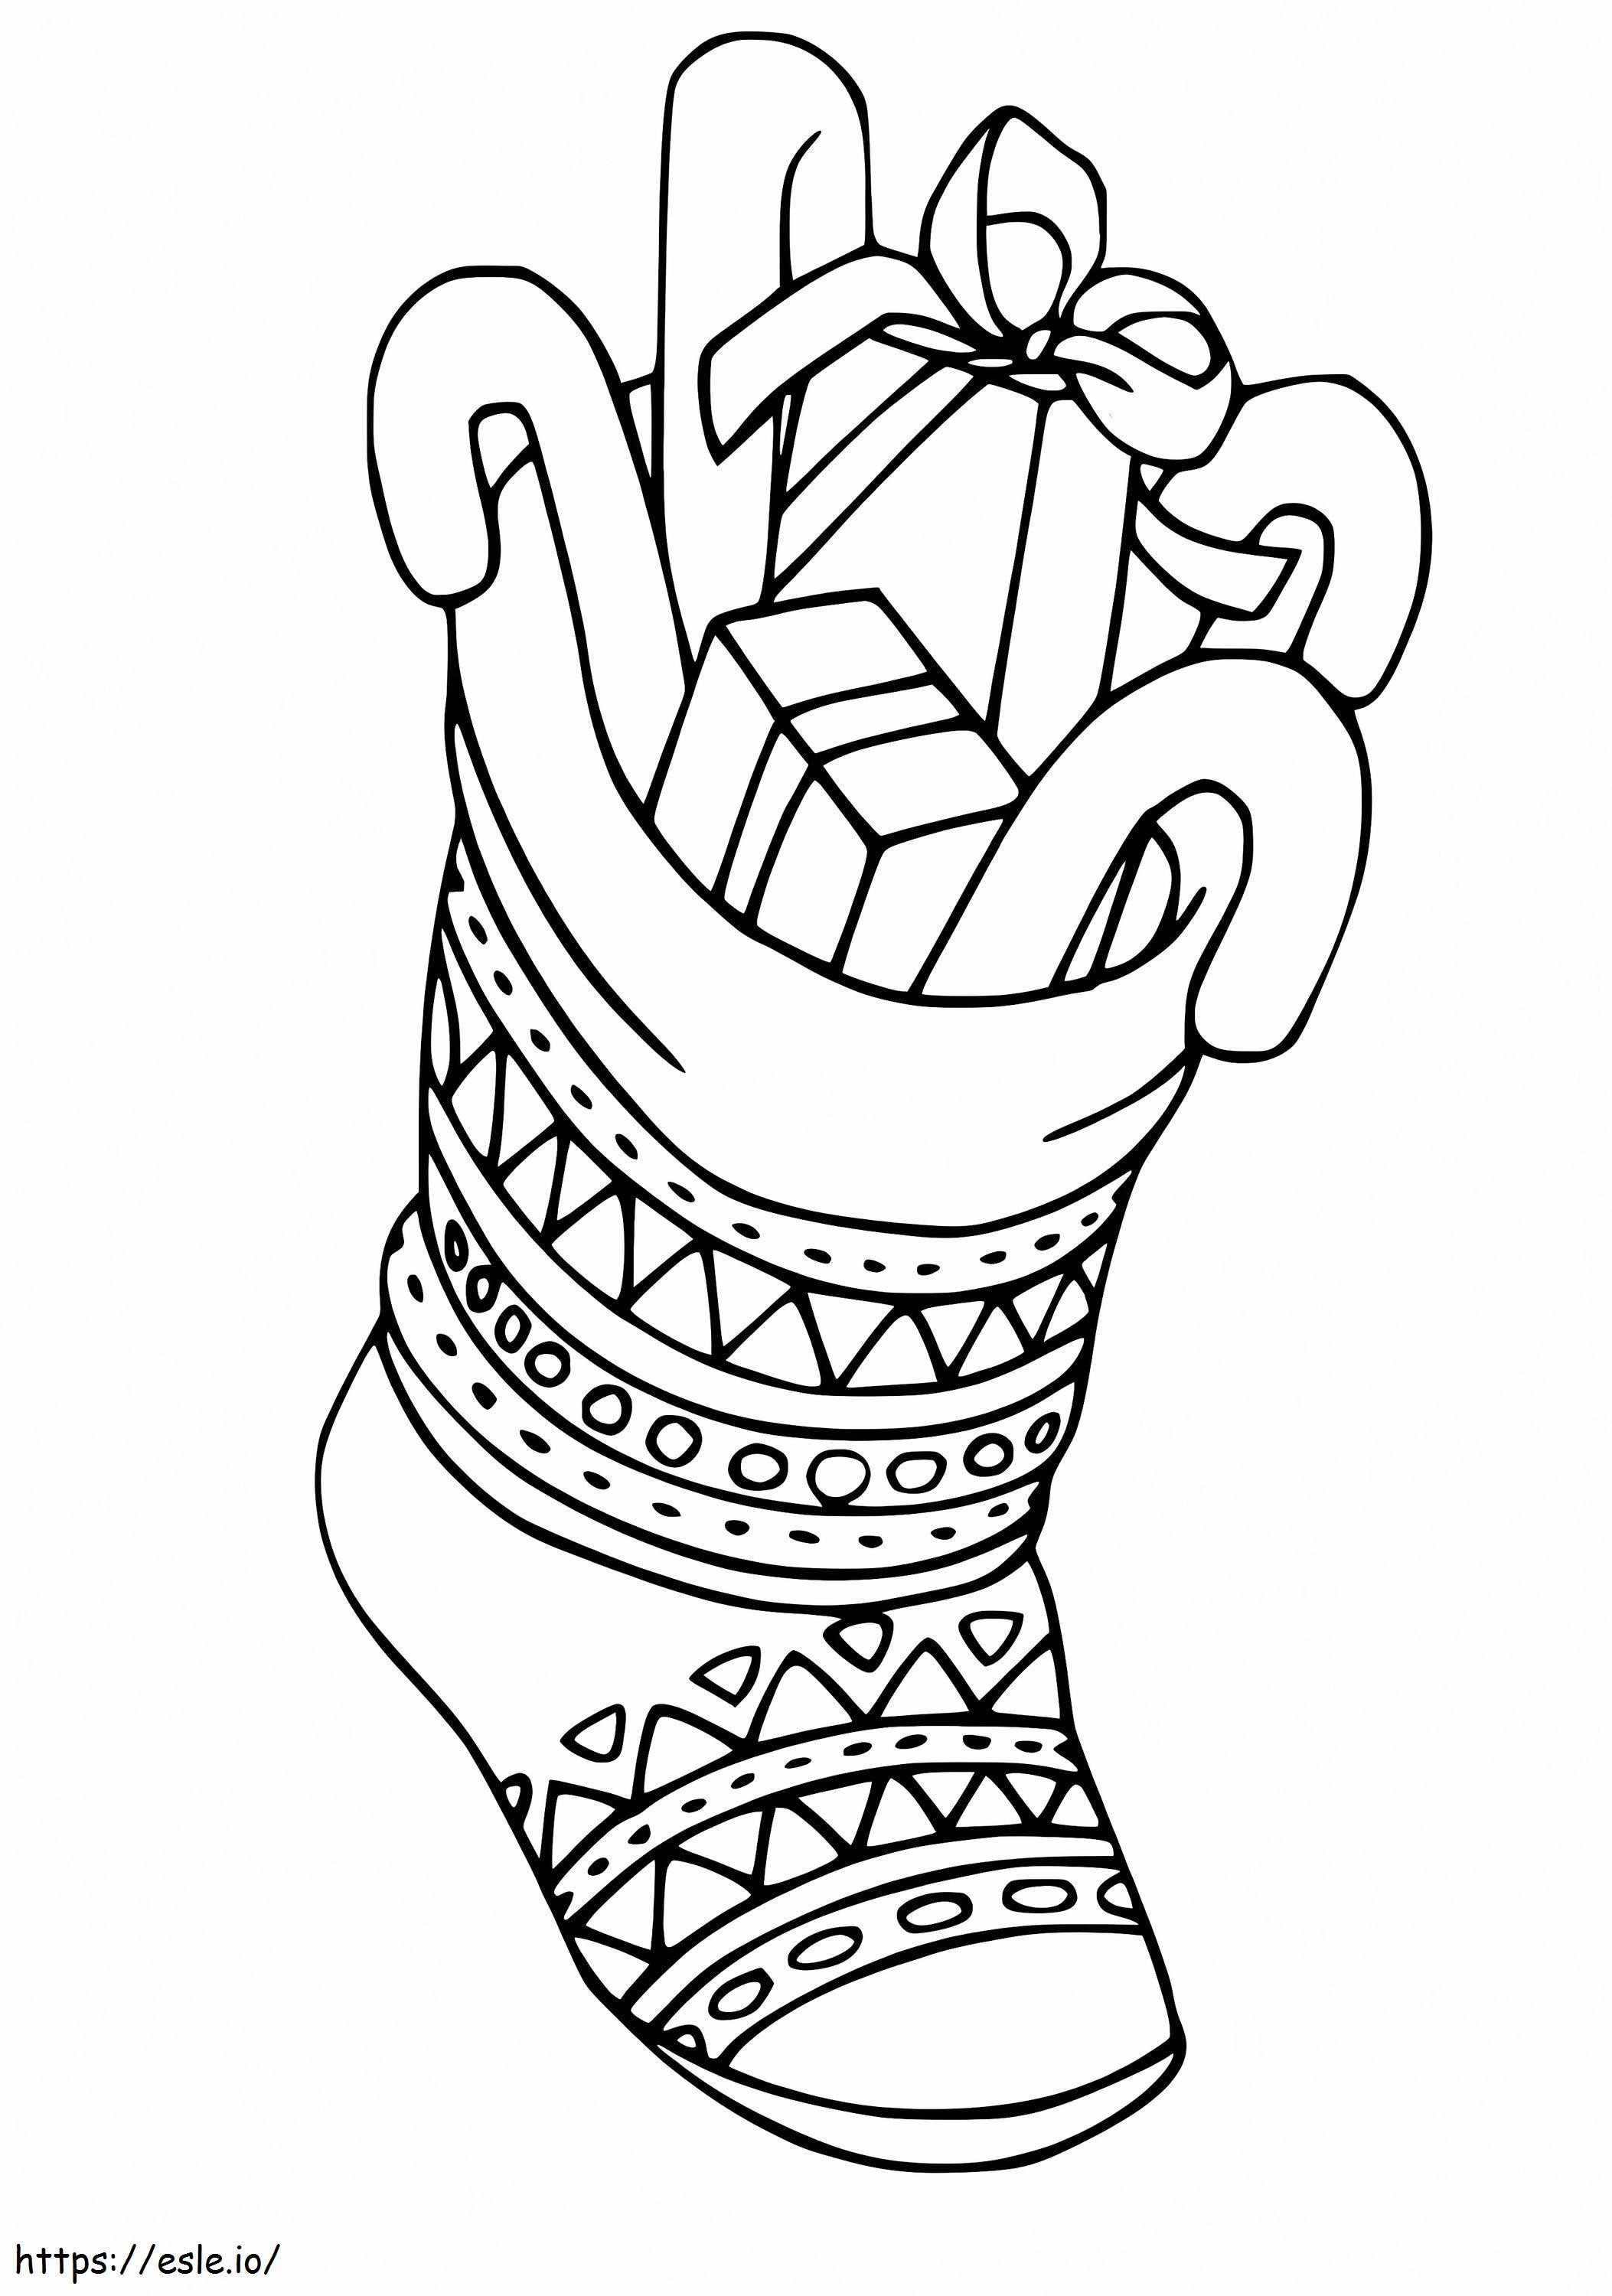 Full Christmas Stocking coloring page